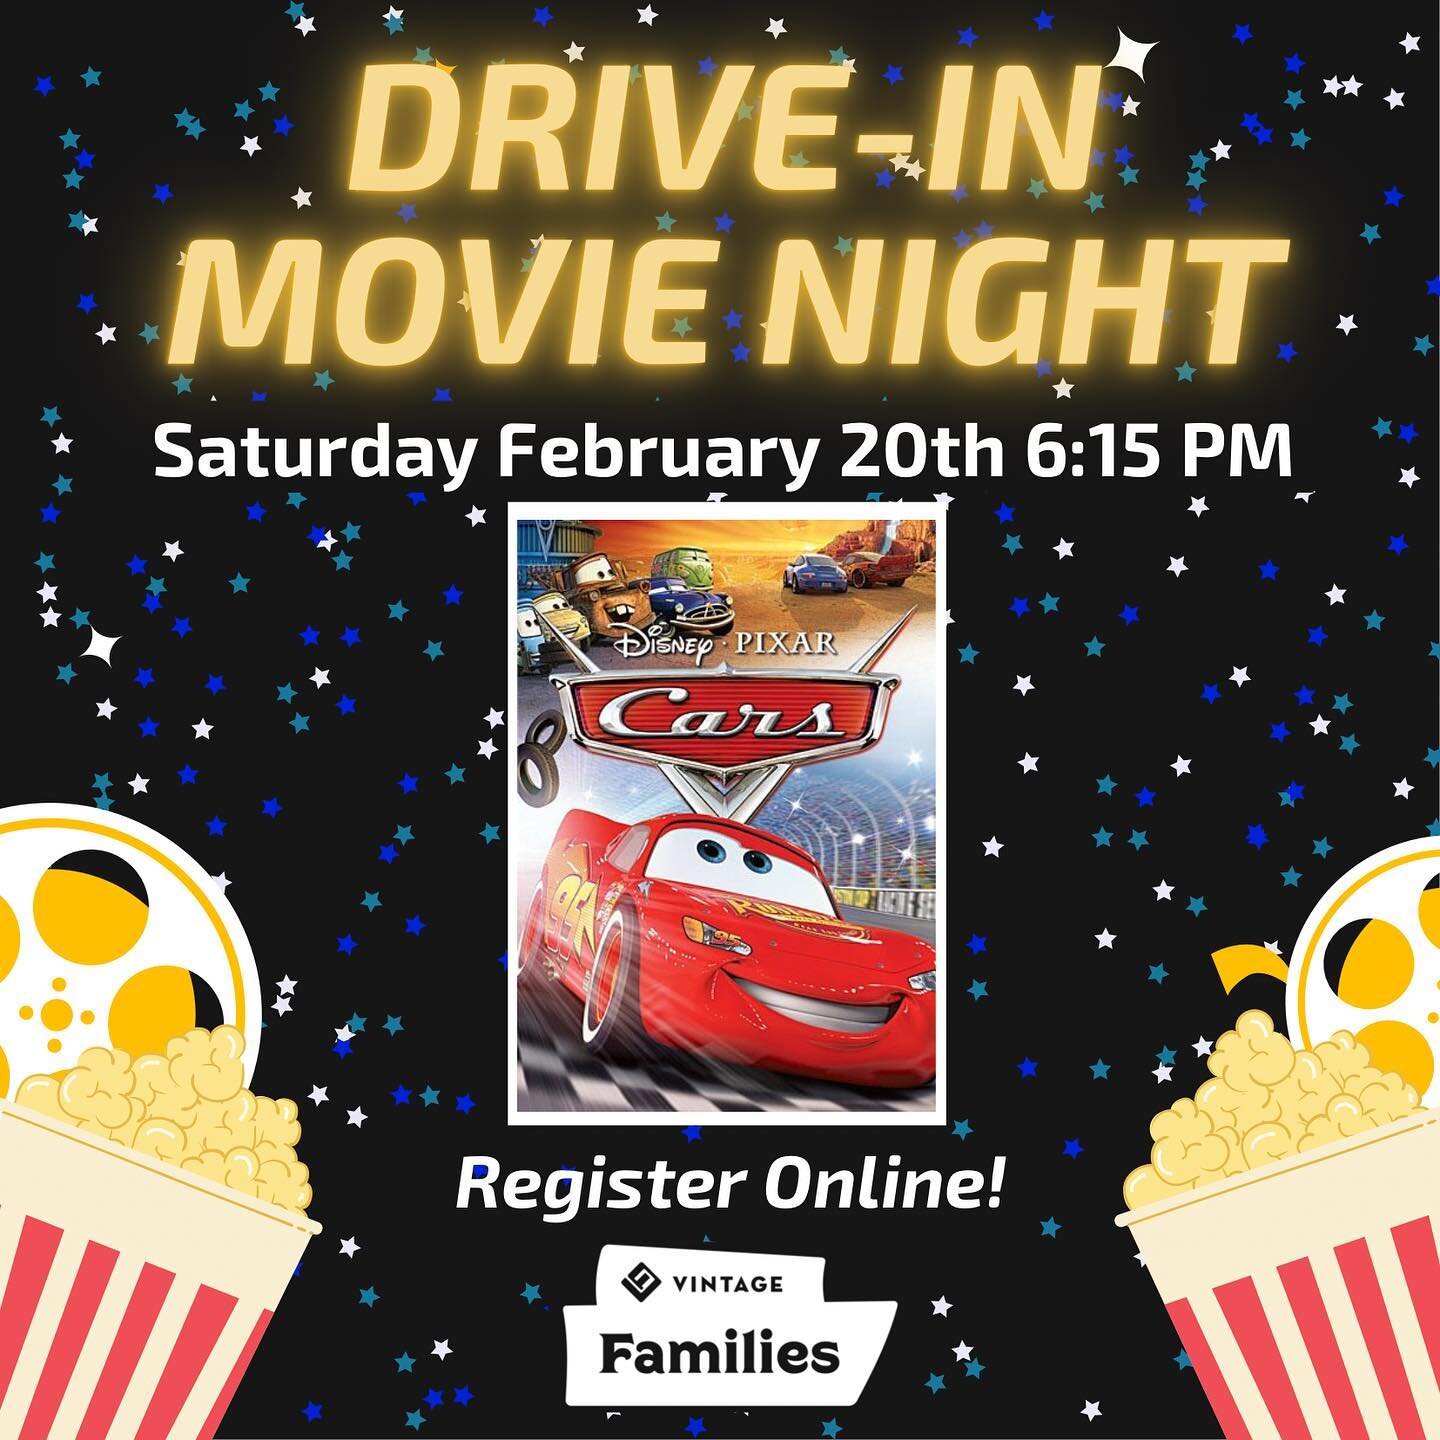 We hope to see you Saturday for our Drive In Movie Night! We are watching Pixar&rsquo;s Cars! Register now! Link in bio!